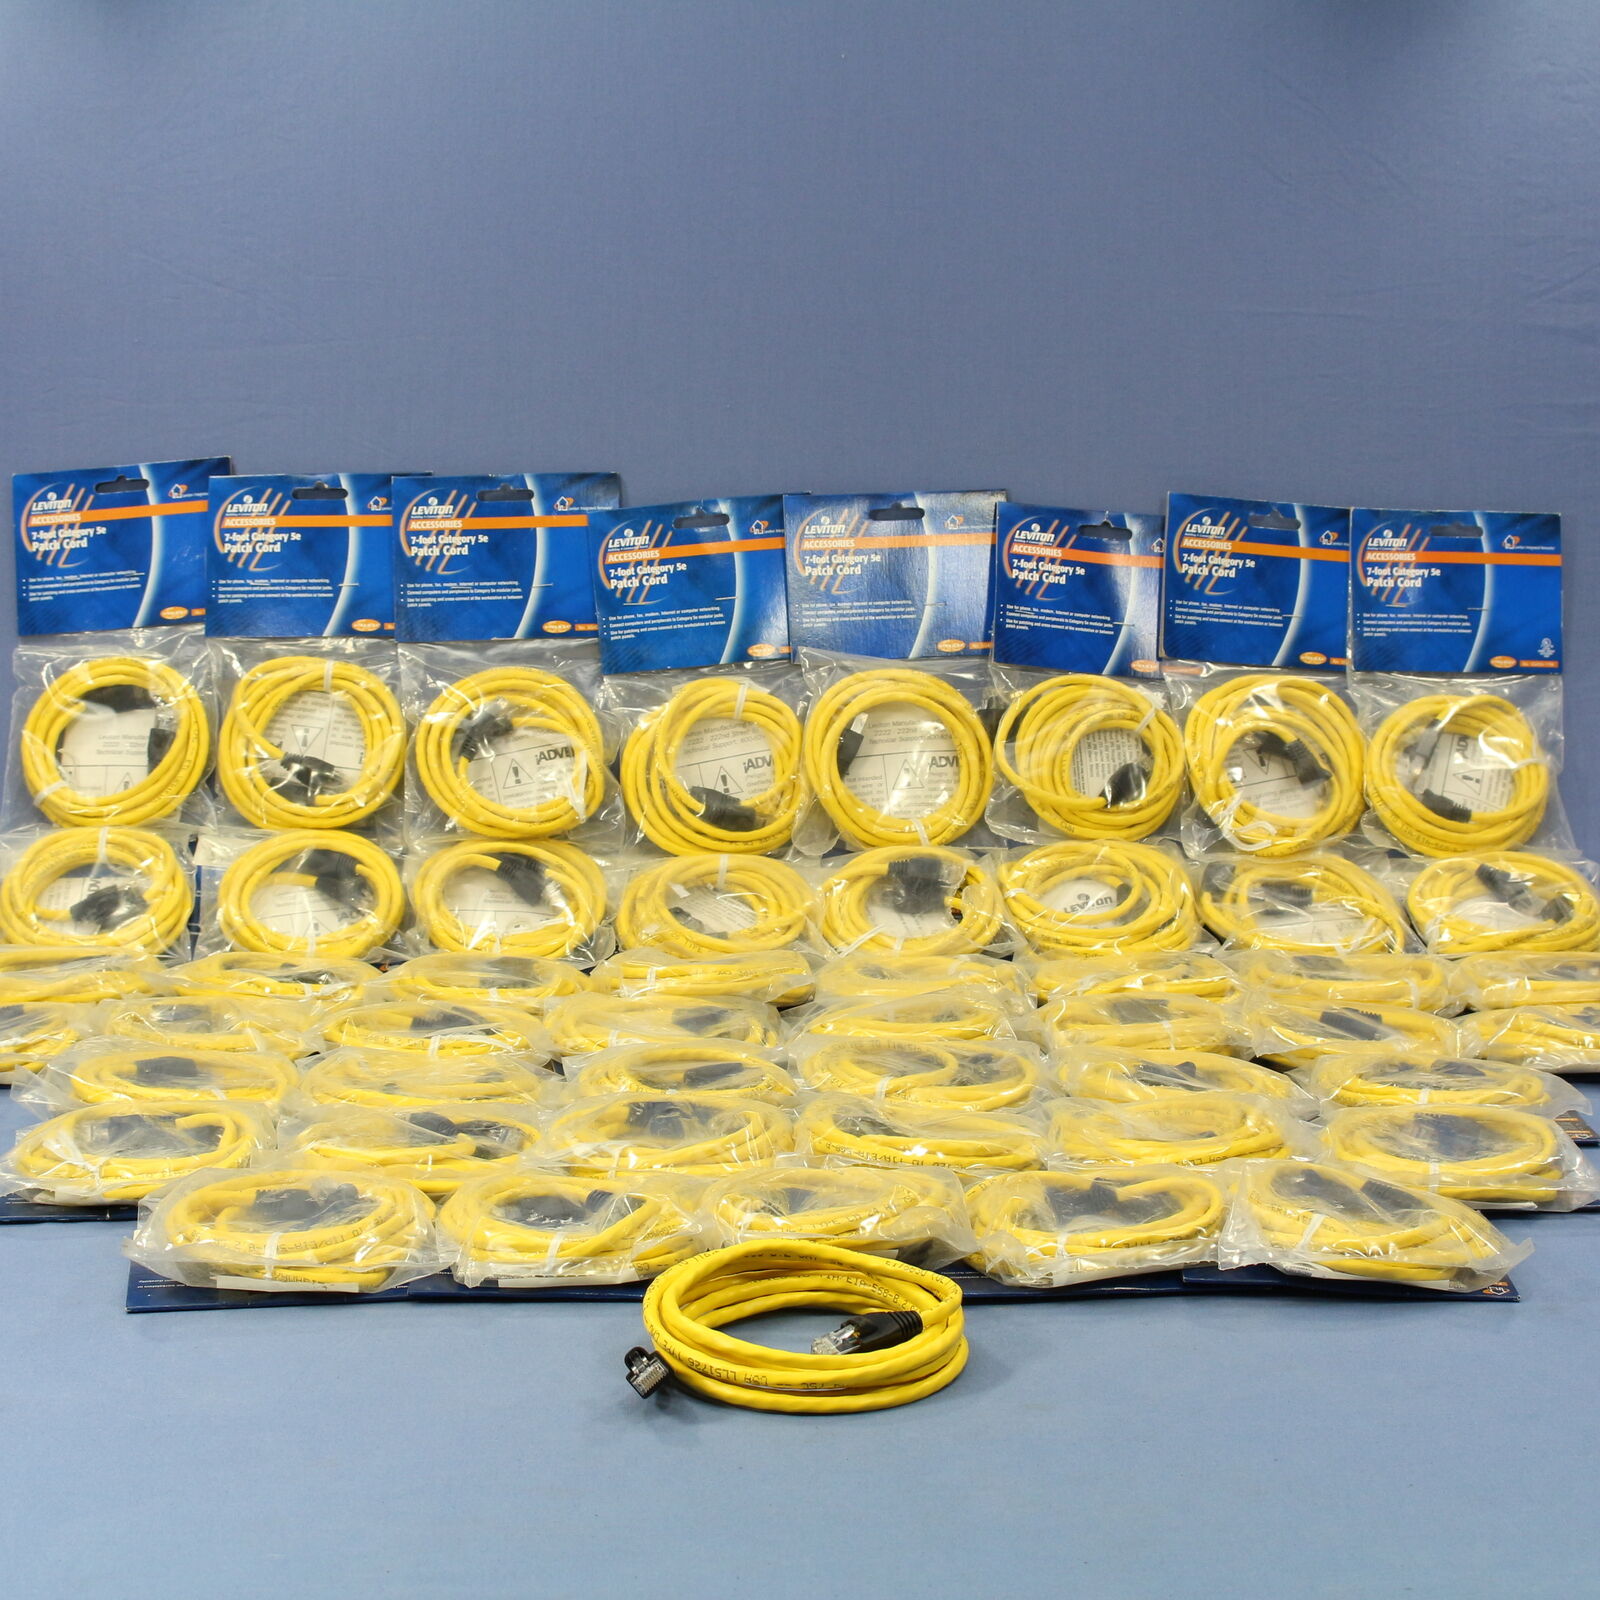 50 Leviton Yellow Cat 5e 7 Ft Ethernet LAN Patch Cords Network Cables 5G455-7YW